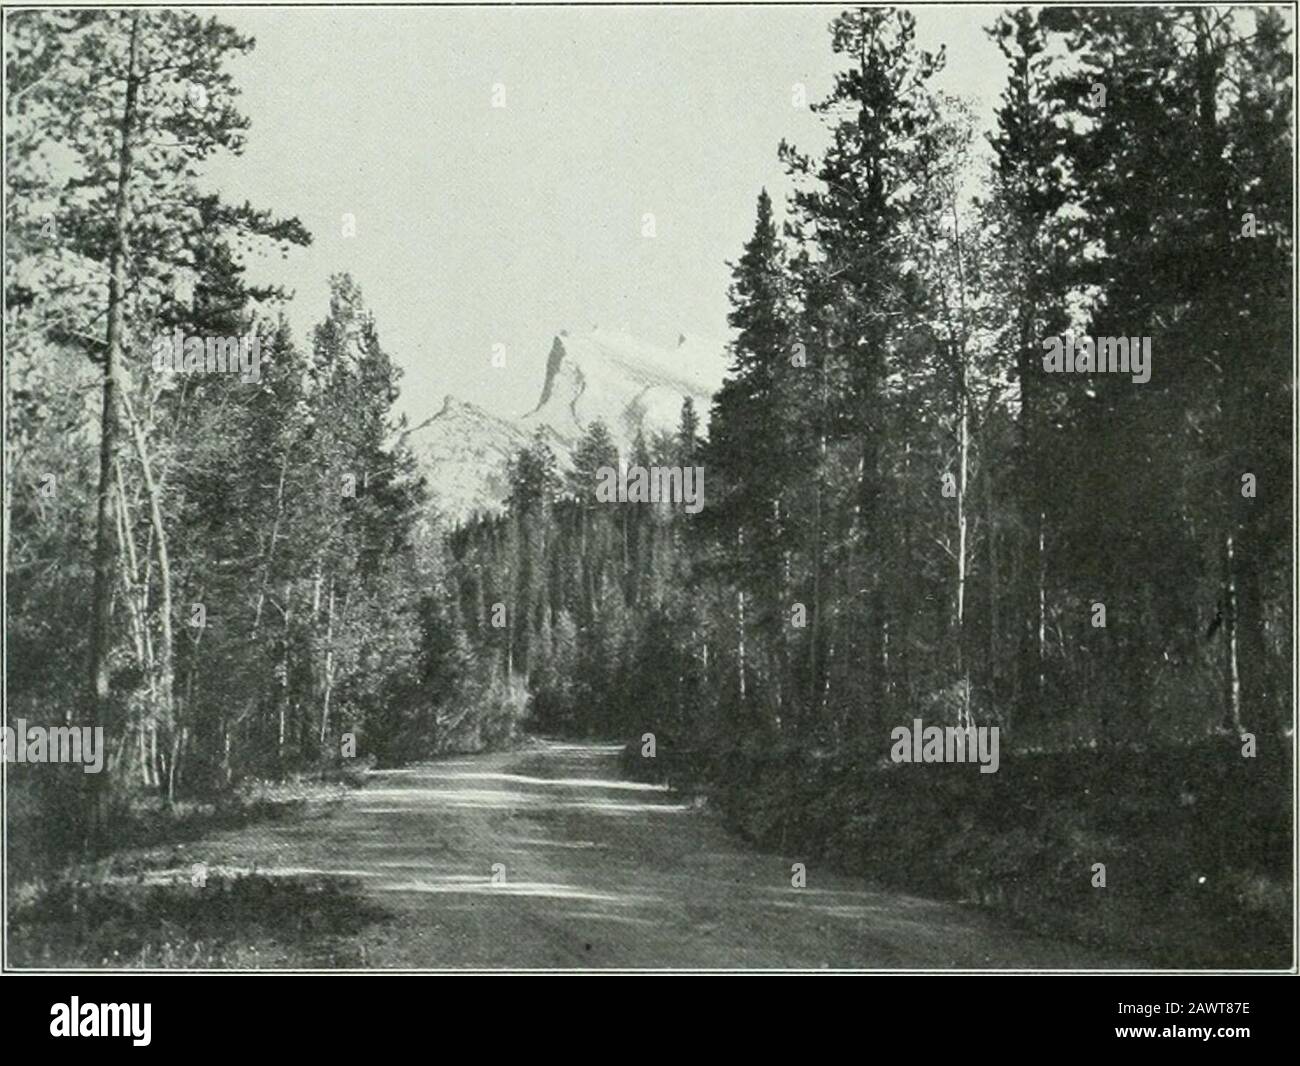 Sessional papers of the Dominion of Canada 1914 . Arch Erected for Visit of Their Royal Highnesses the Duke and Duchess of Connaught and Princess l;.tricia, to Banff, 1912.. Cave Avenue, Banff. Mt. Kundle in distance. 25— 1!H4—v--7. BK$ -; -* ?. ^i * / ? M**Sfi it&t . • WiE^LM* ? - VKhkMu *M^I^ ^^i 1^ Winter in the Rocky Mountains Park. Snow Mushrooms. Stock Photo